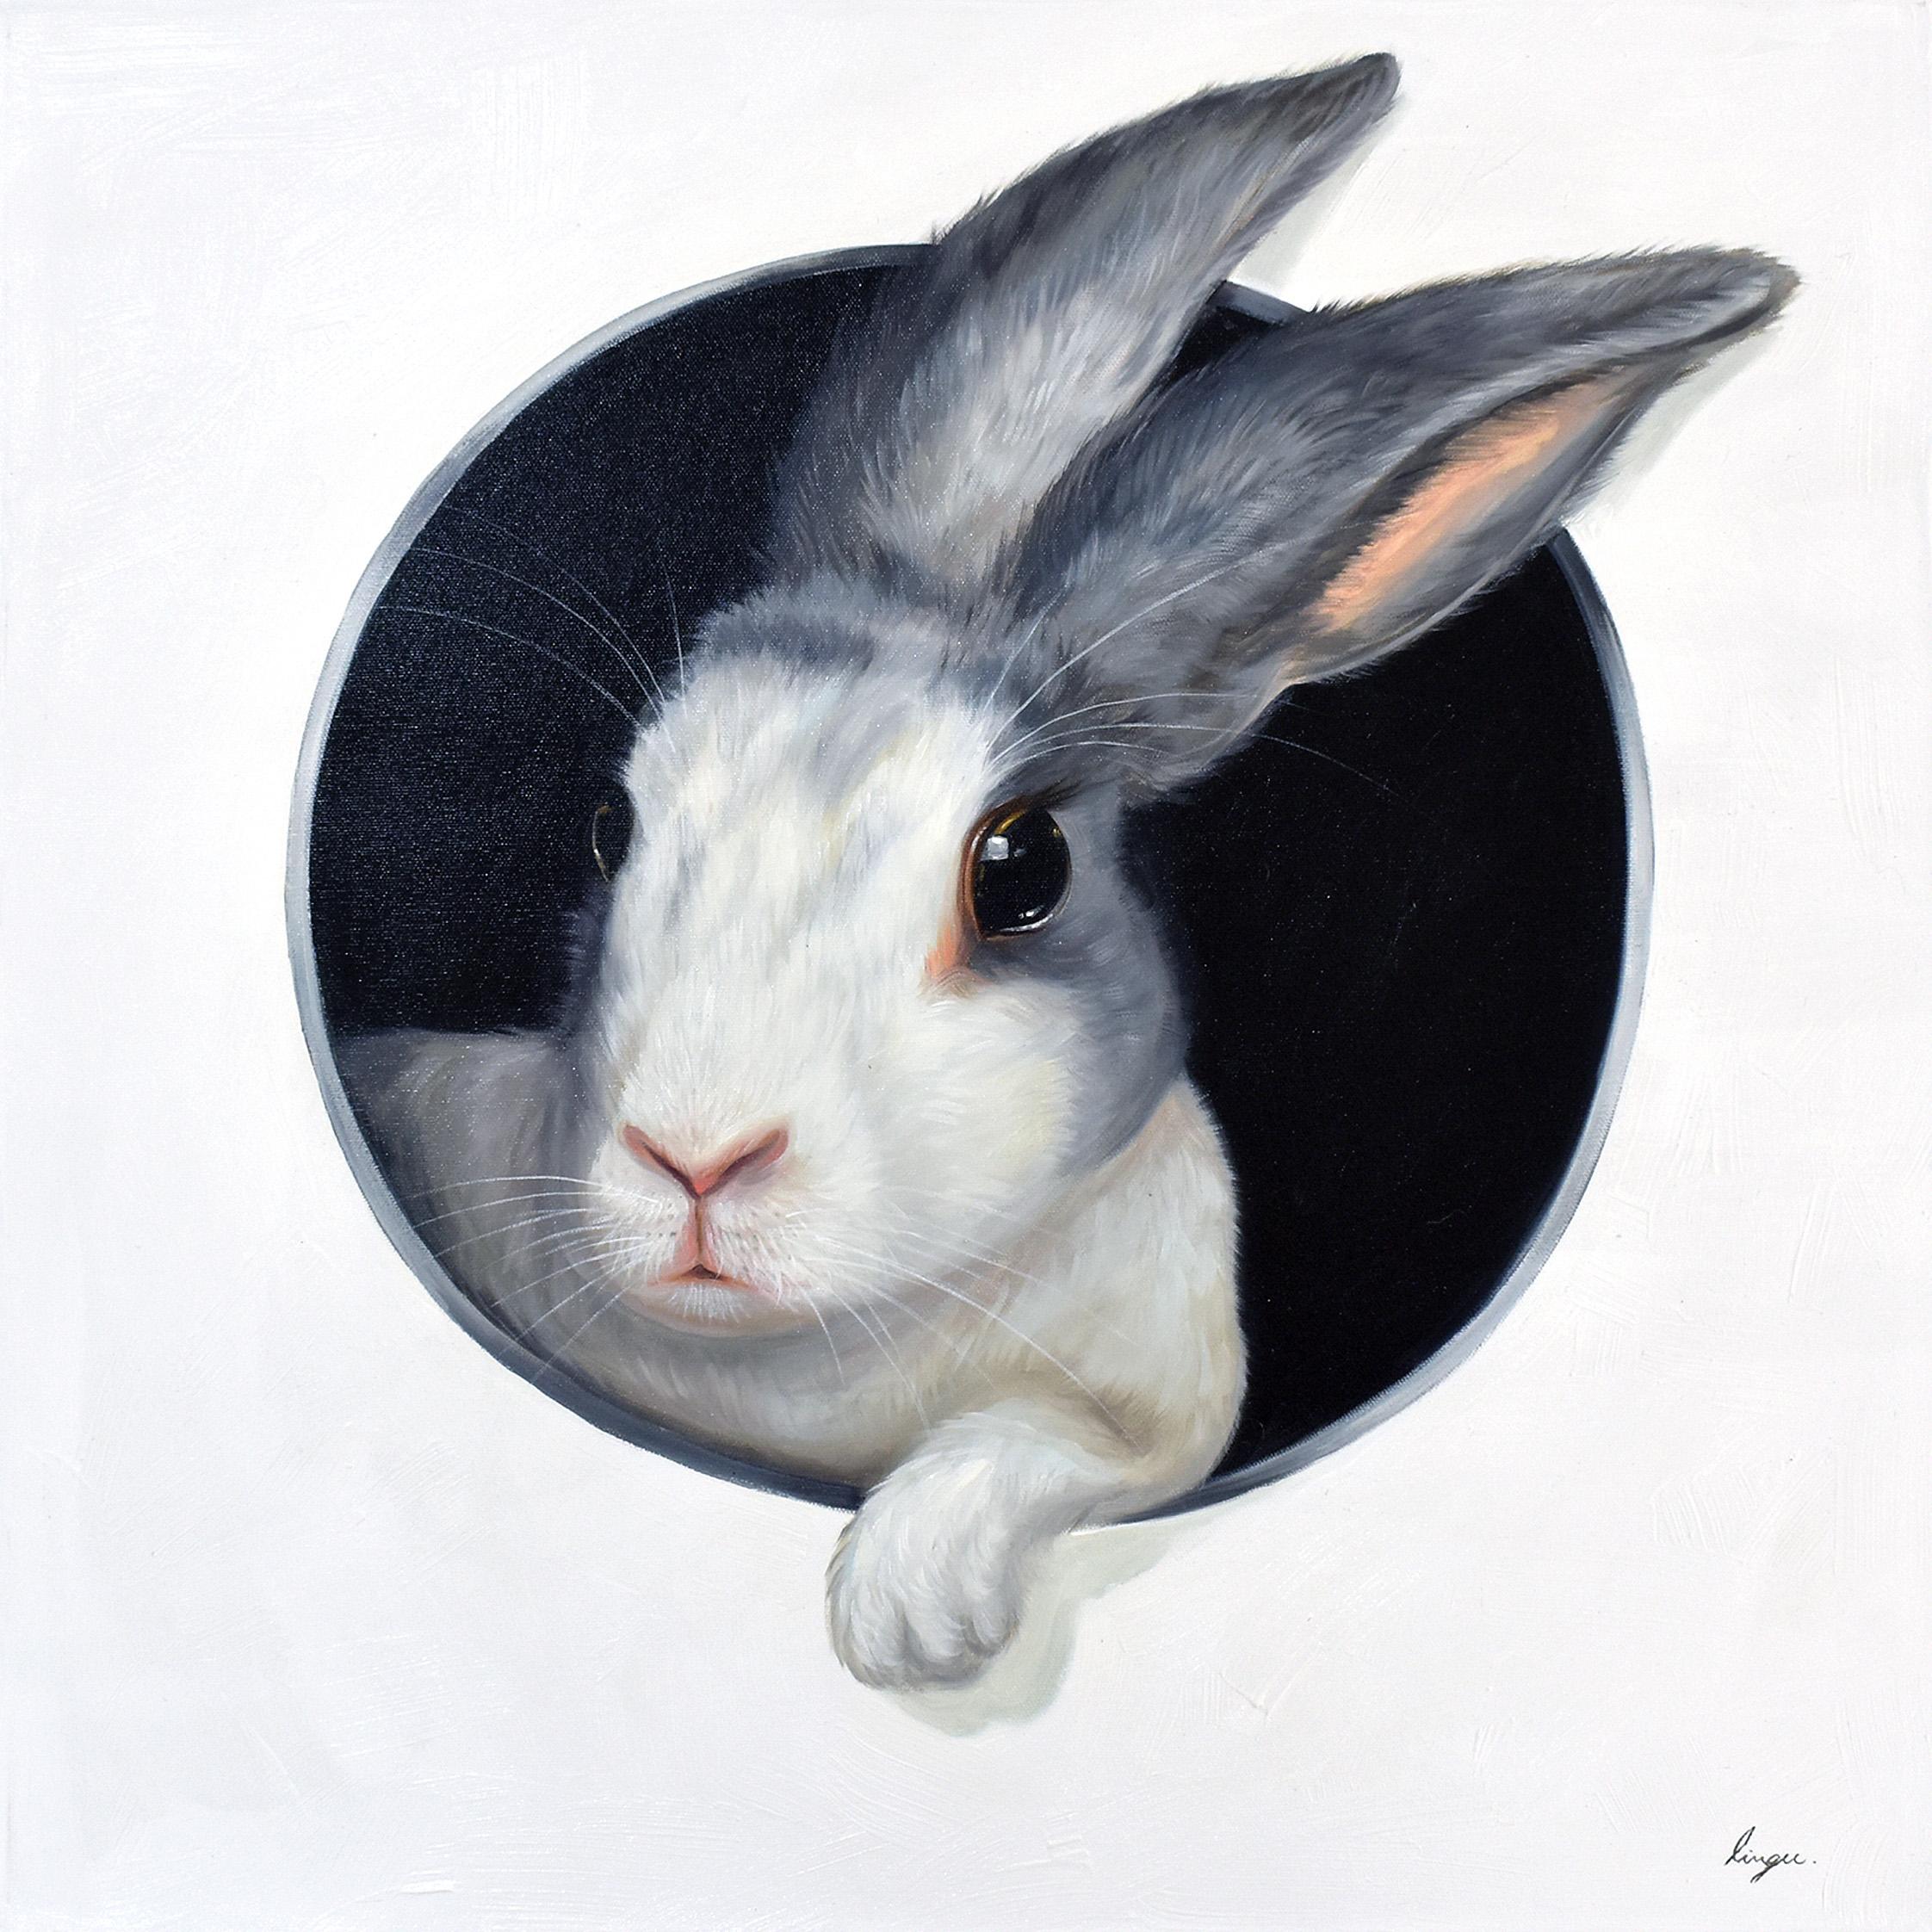 Lingee Bangkhuntod Animal Painting - Hare In Hole 3. Rabbit looking Through a Hole. Adorable rabbit Oil painting